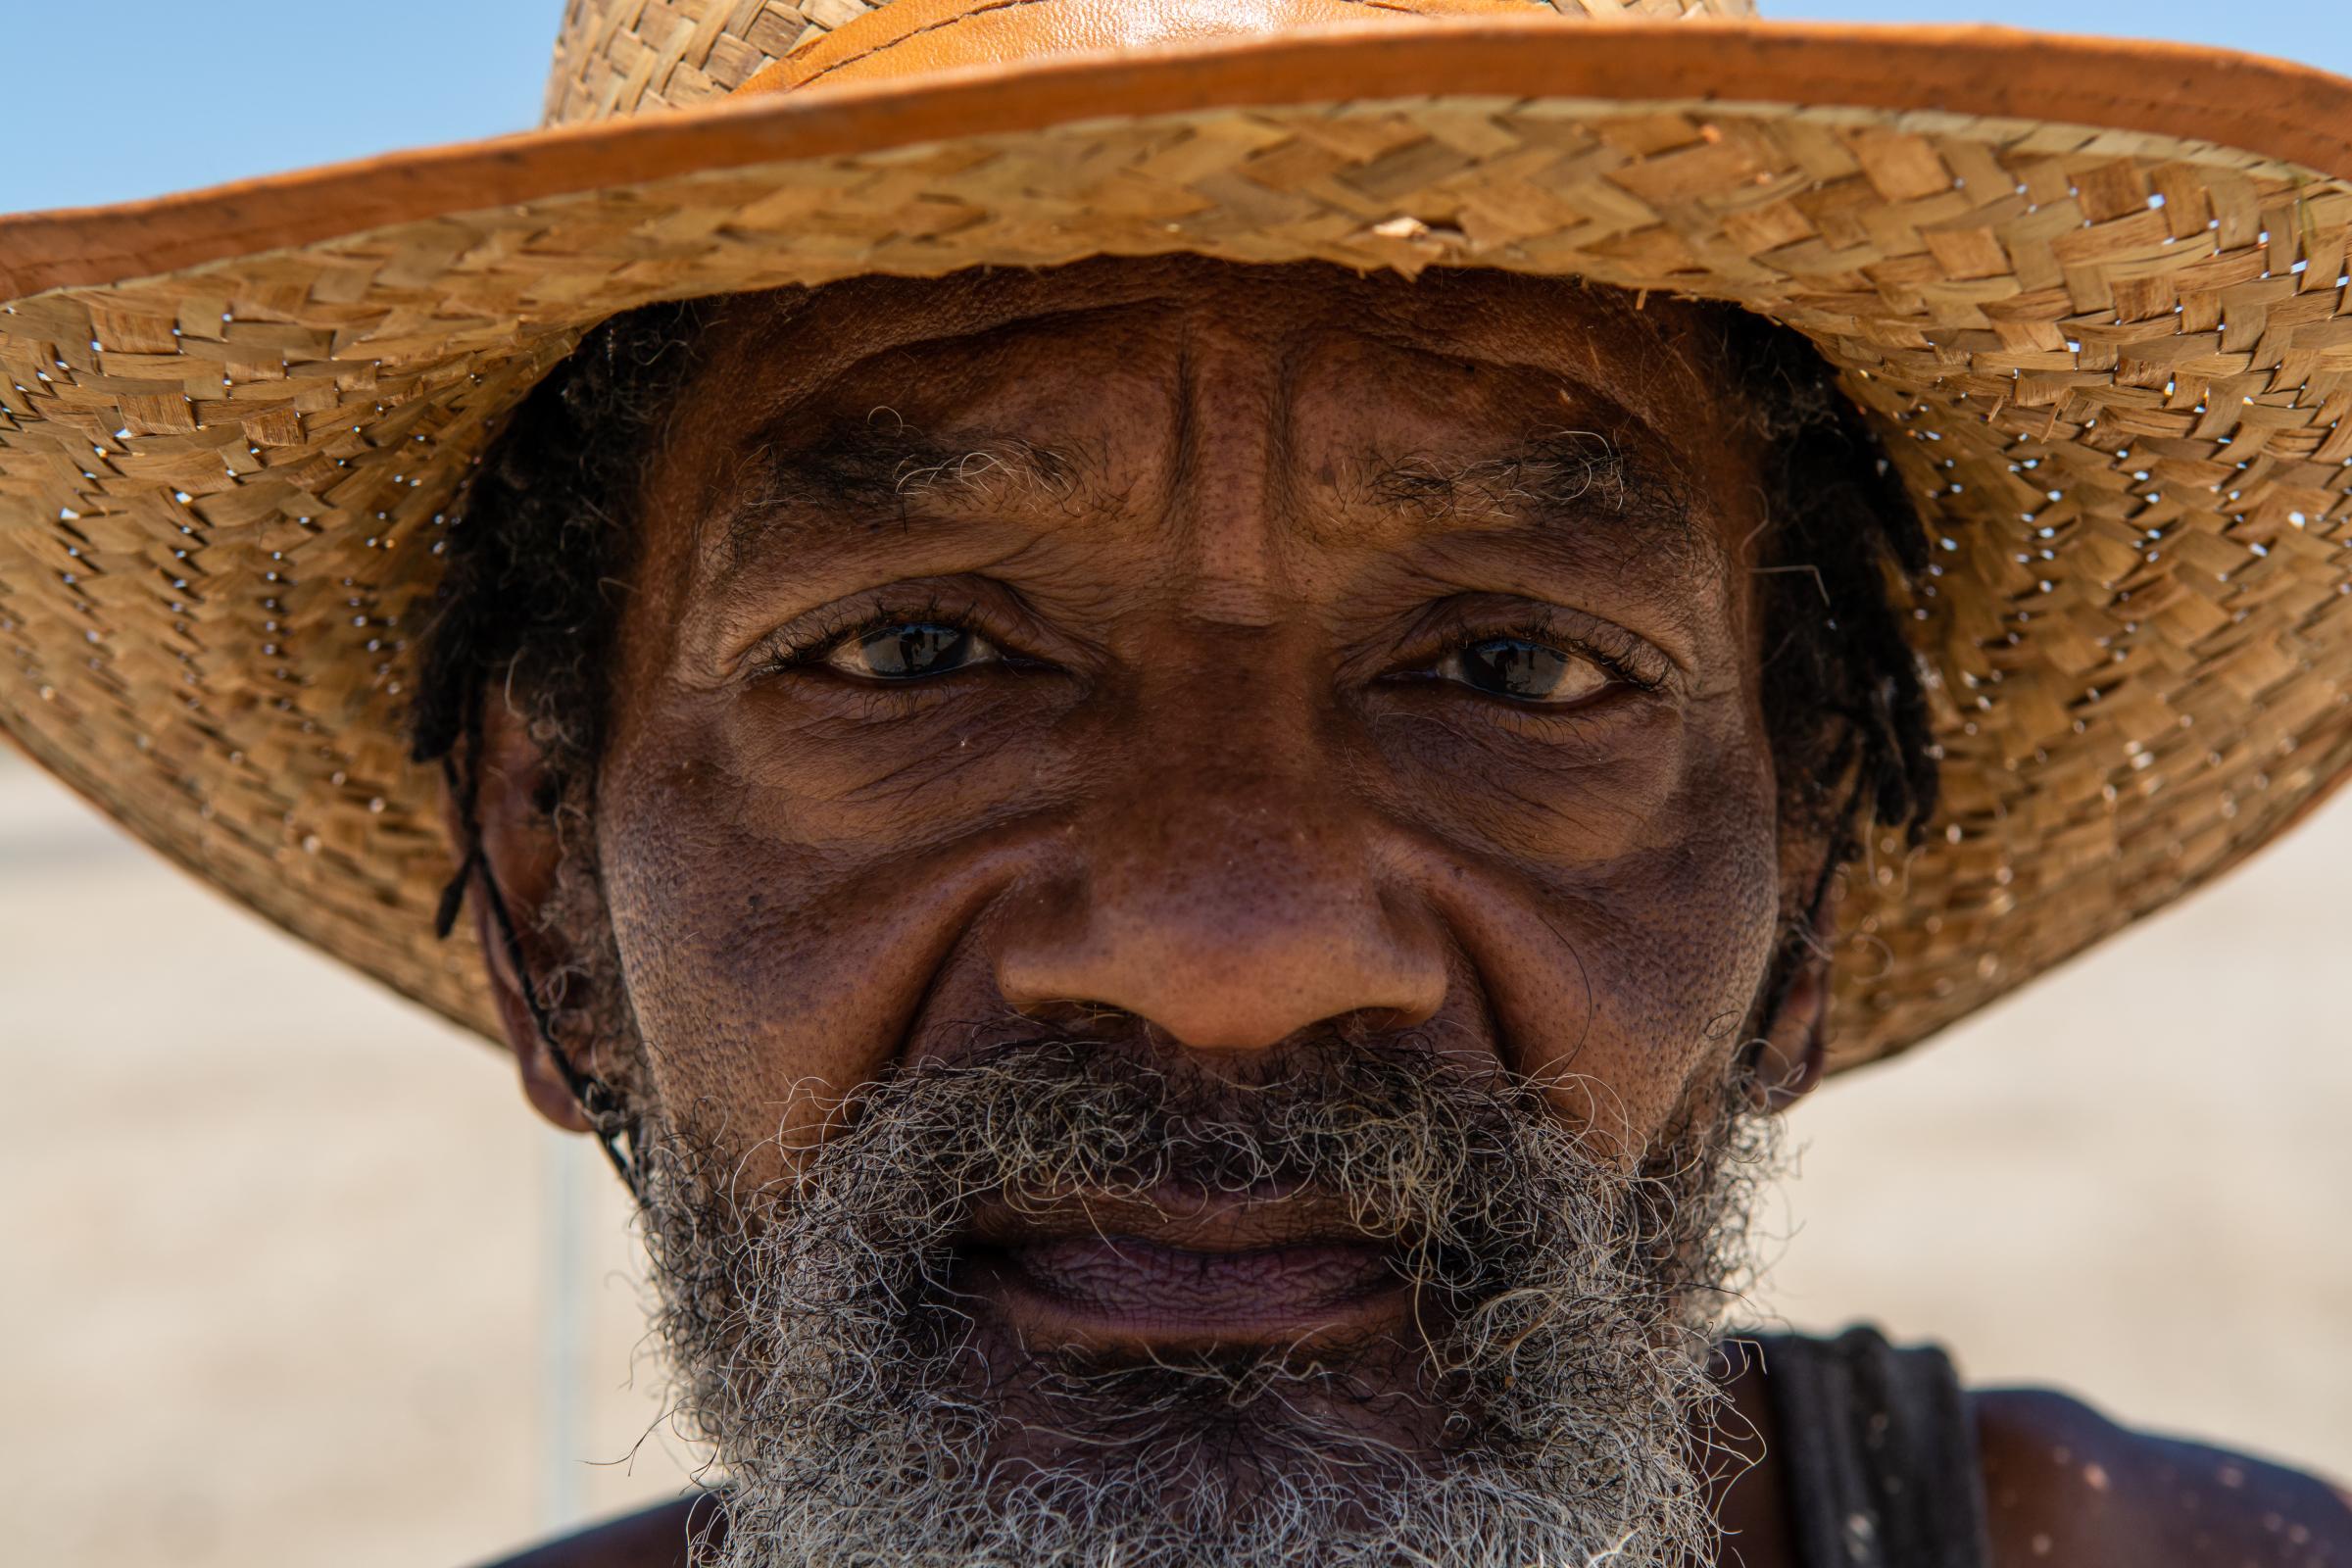 PORTRAITS & FACES - 5/10/16-California  - A portrait of a man named Charles...